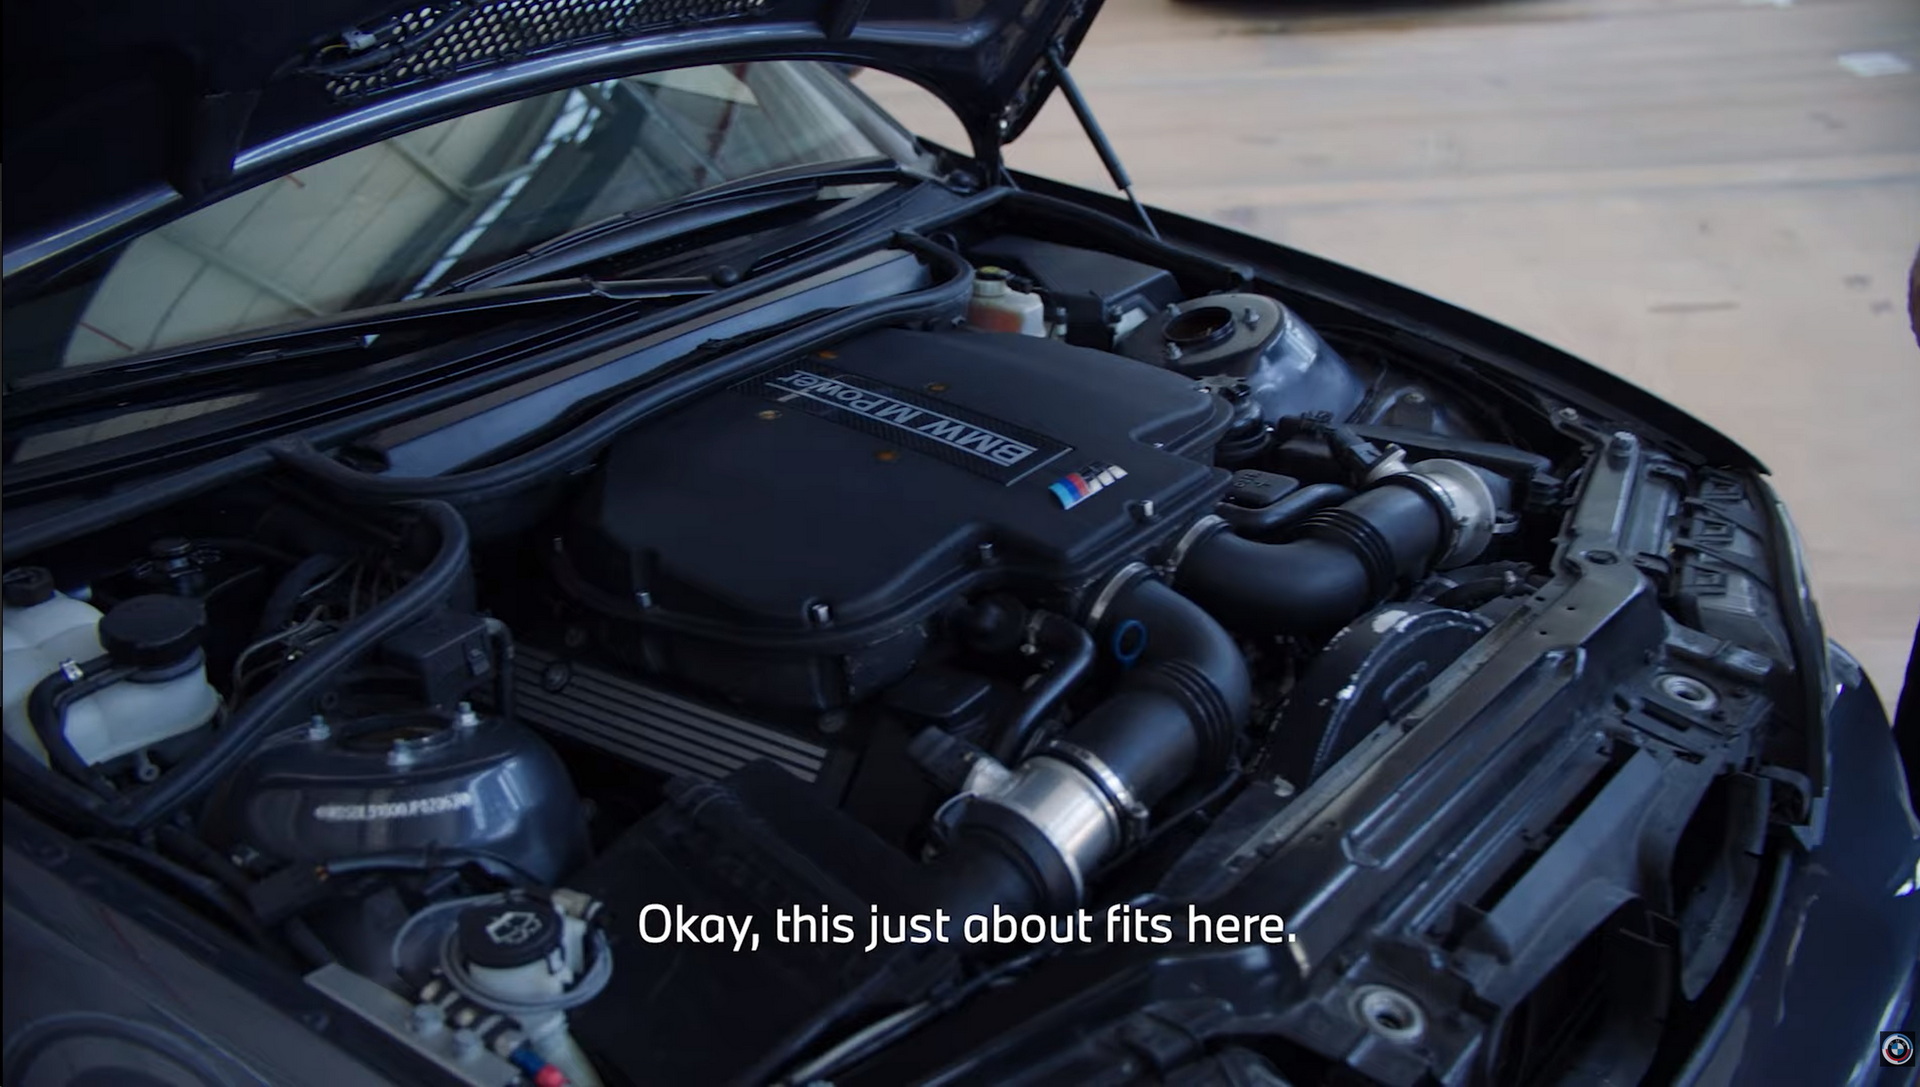 BMW M secretly built an M5-engined E46 M3 CSL, and this is it